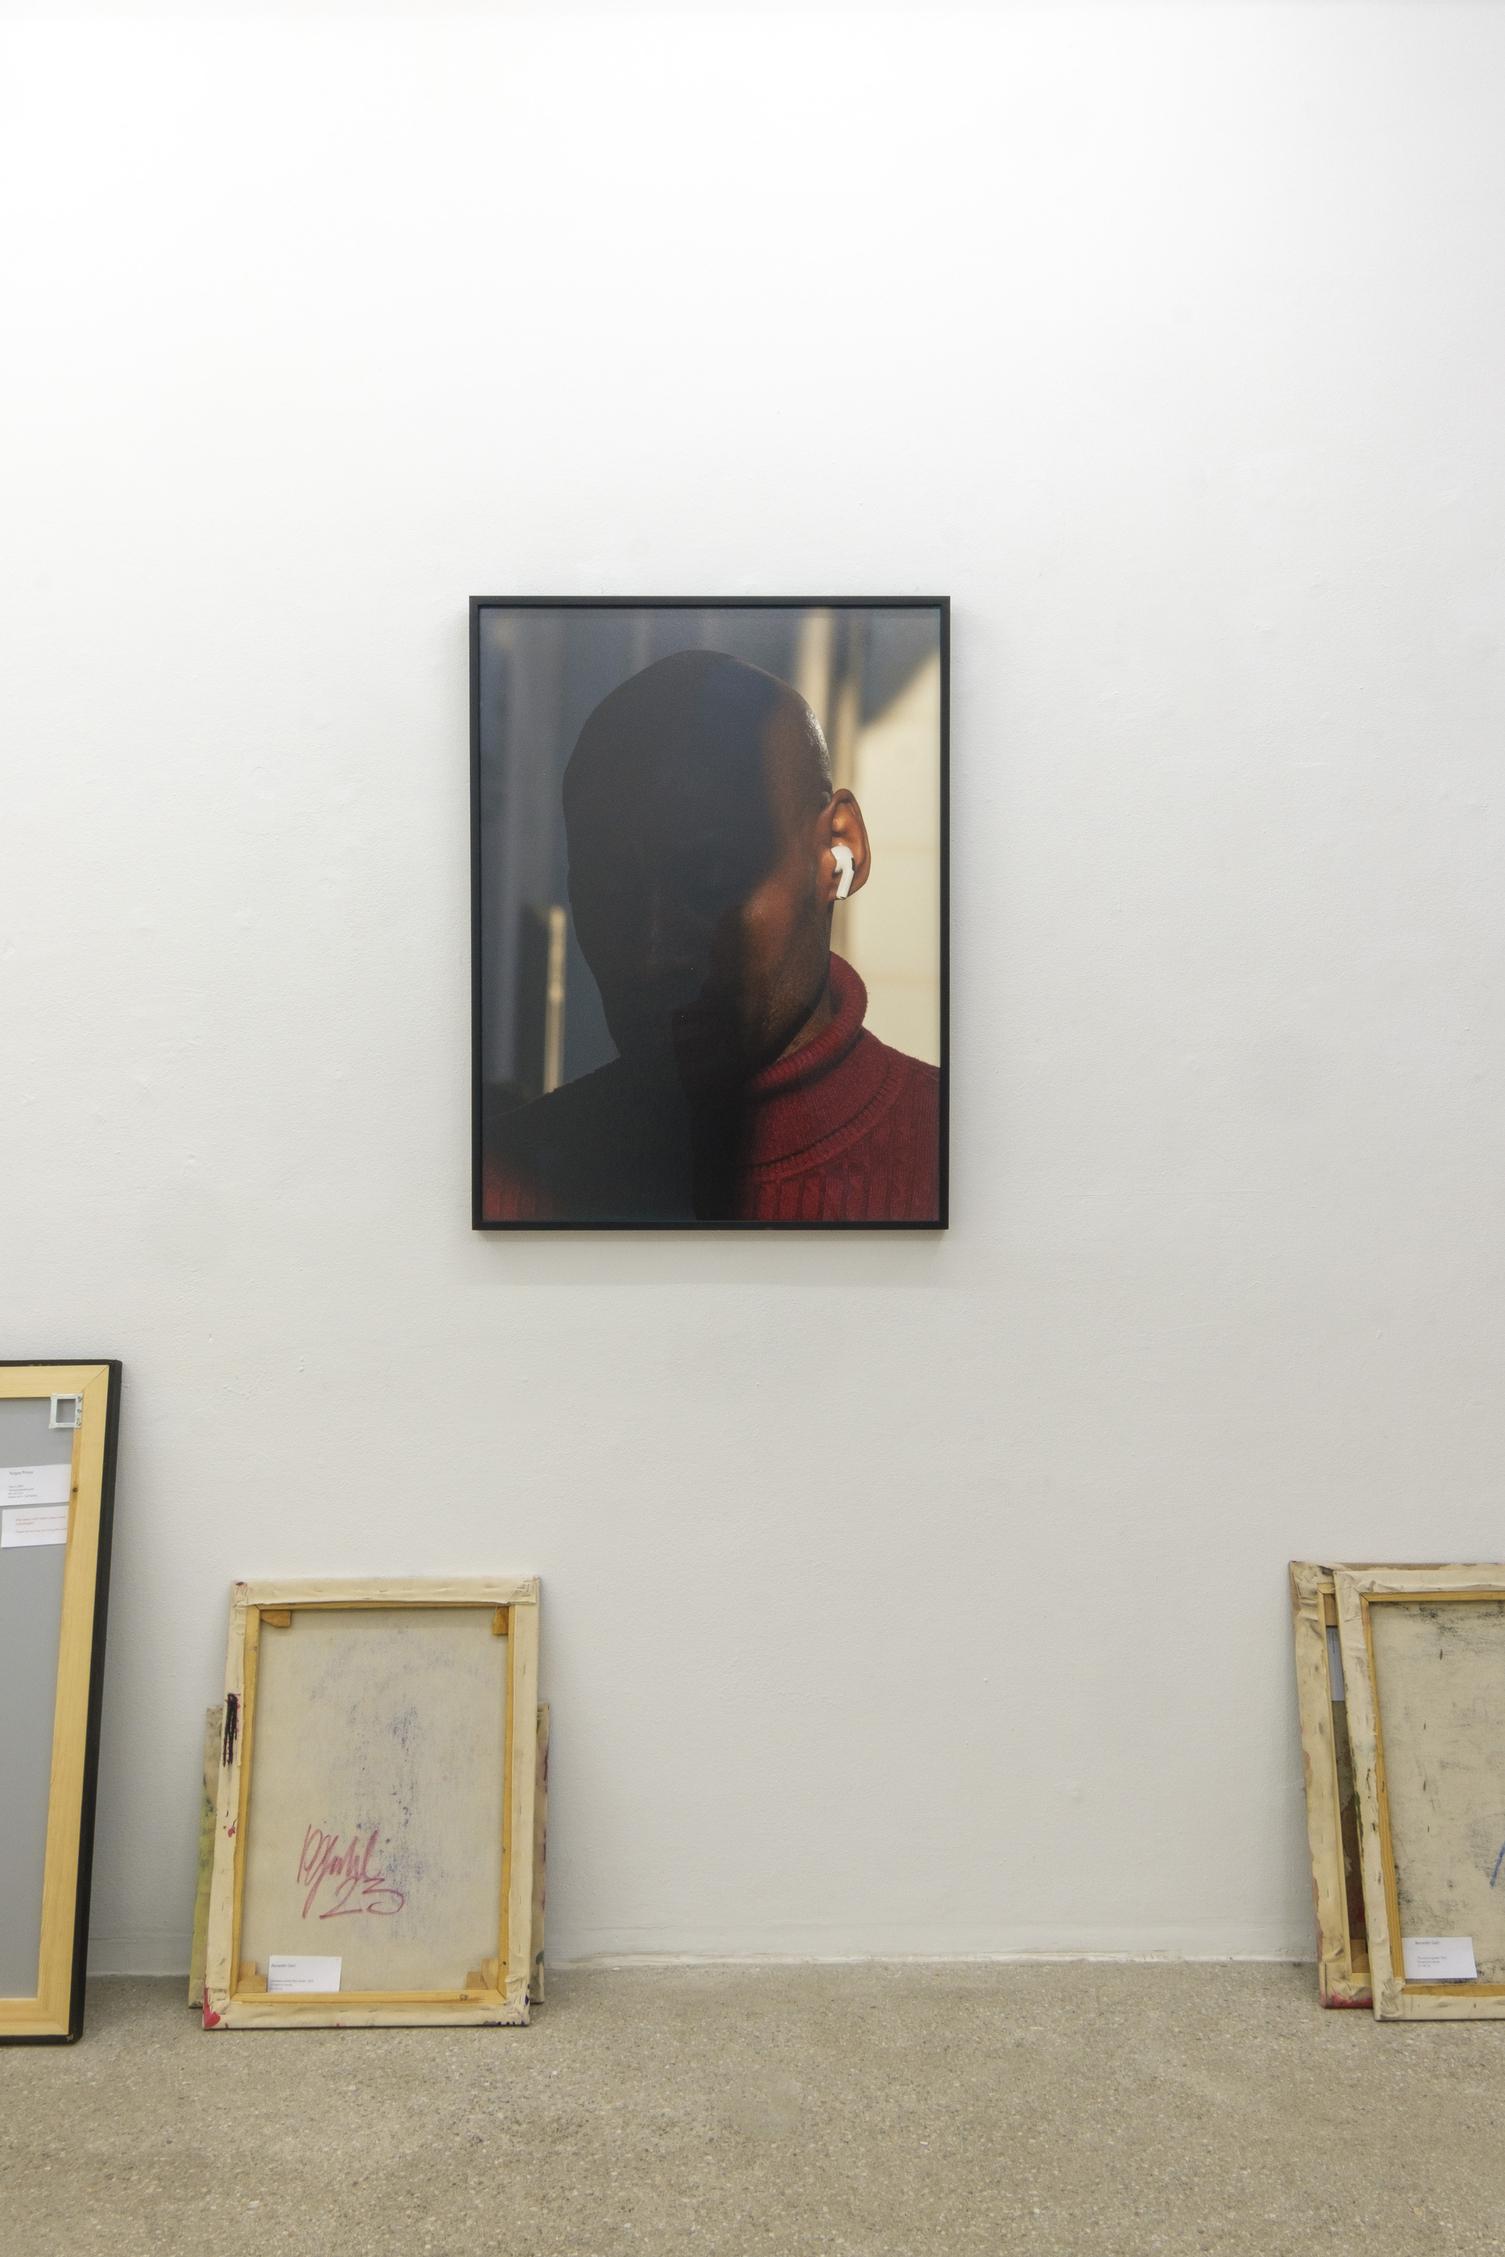 Installation view, "Self Service", with work by Yorgos Prinos, "Man in Shadow," 2022, Archival pigment print, 90x67.5 cm, Edition of 5 + 2 AP (#1/5)